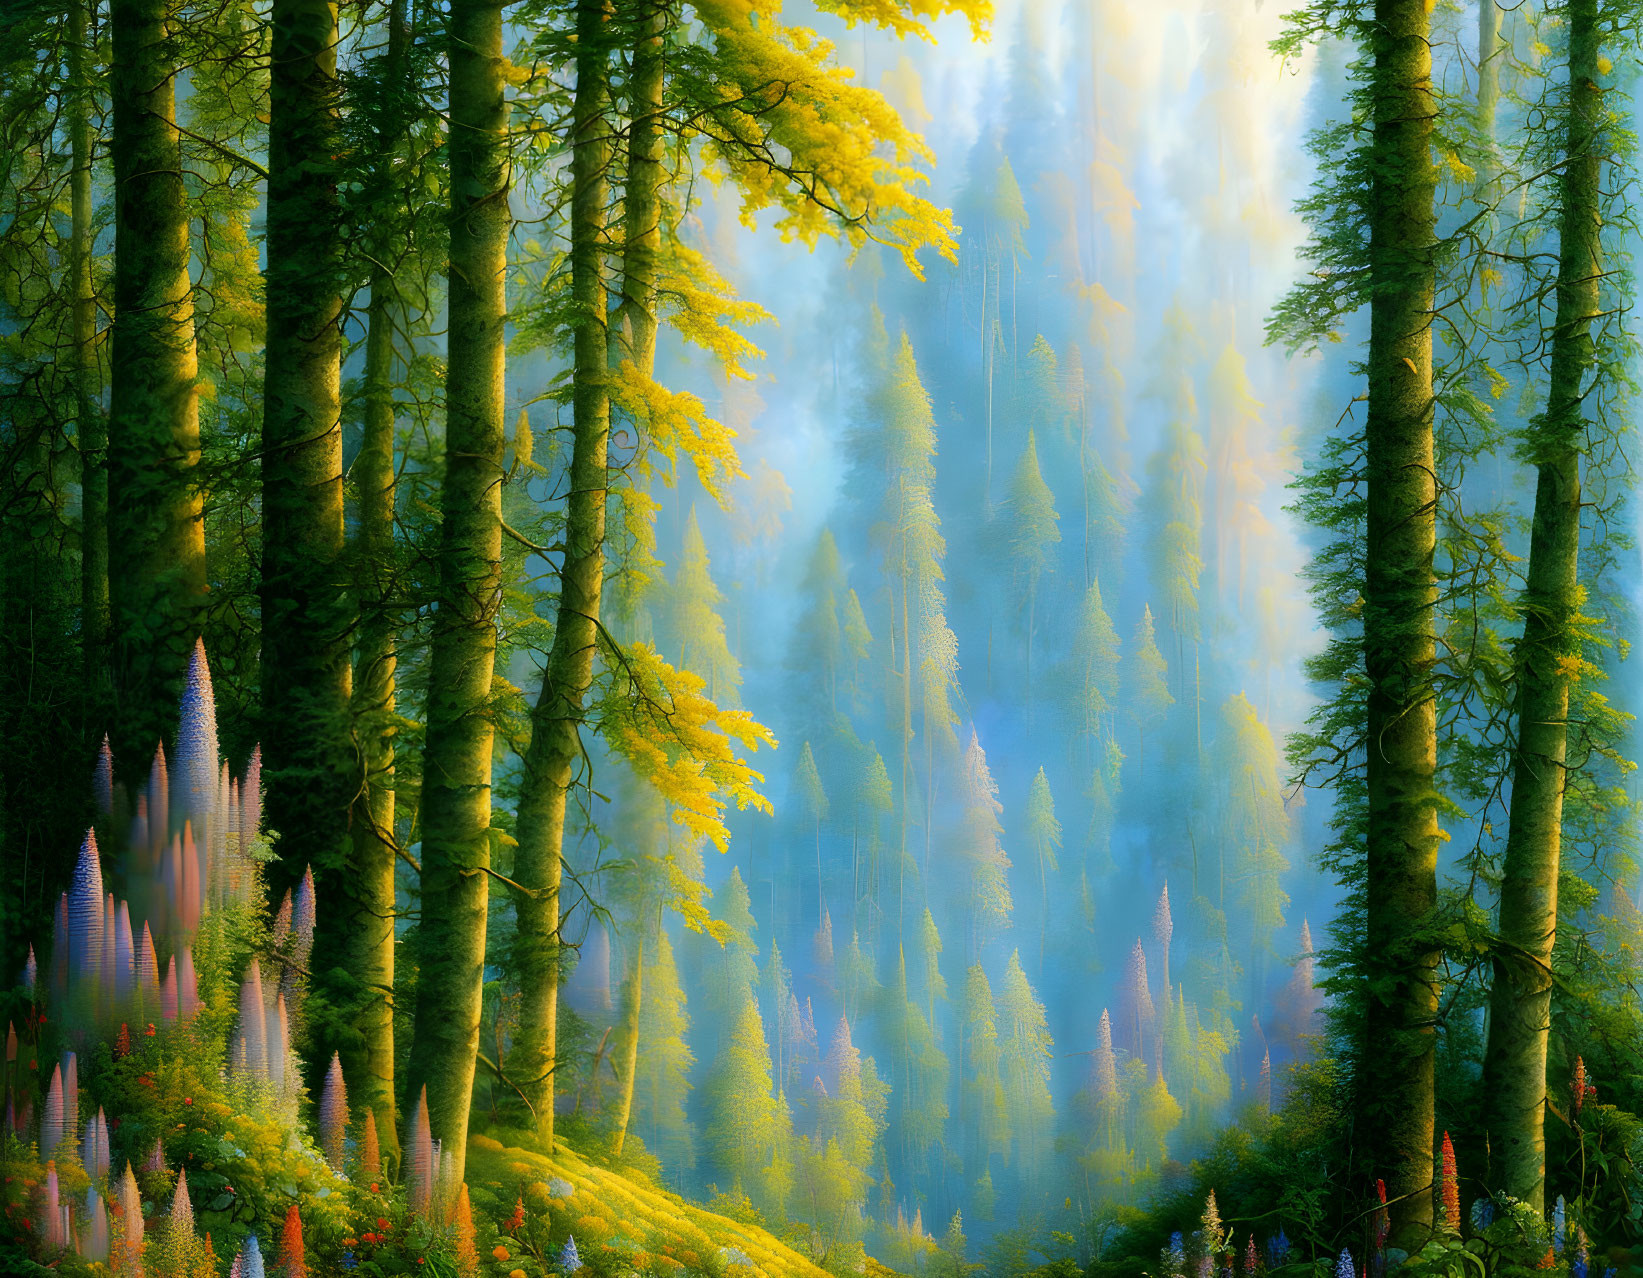 Lush forest scene with sunlight filtering through mist and tall trees